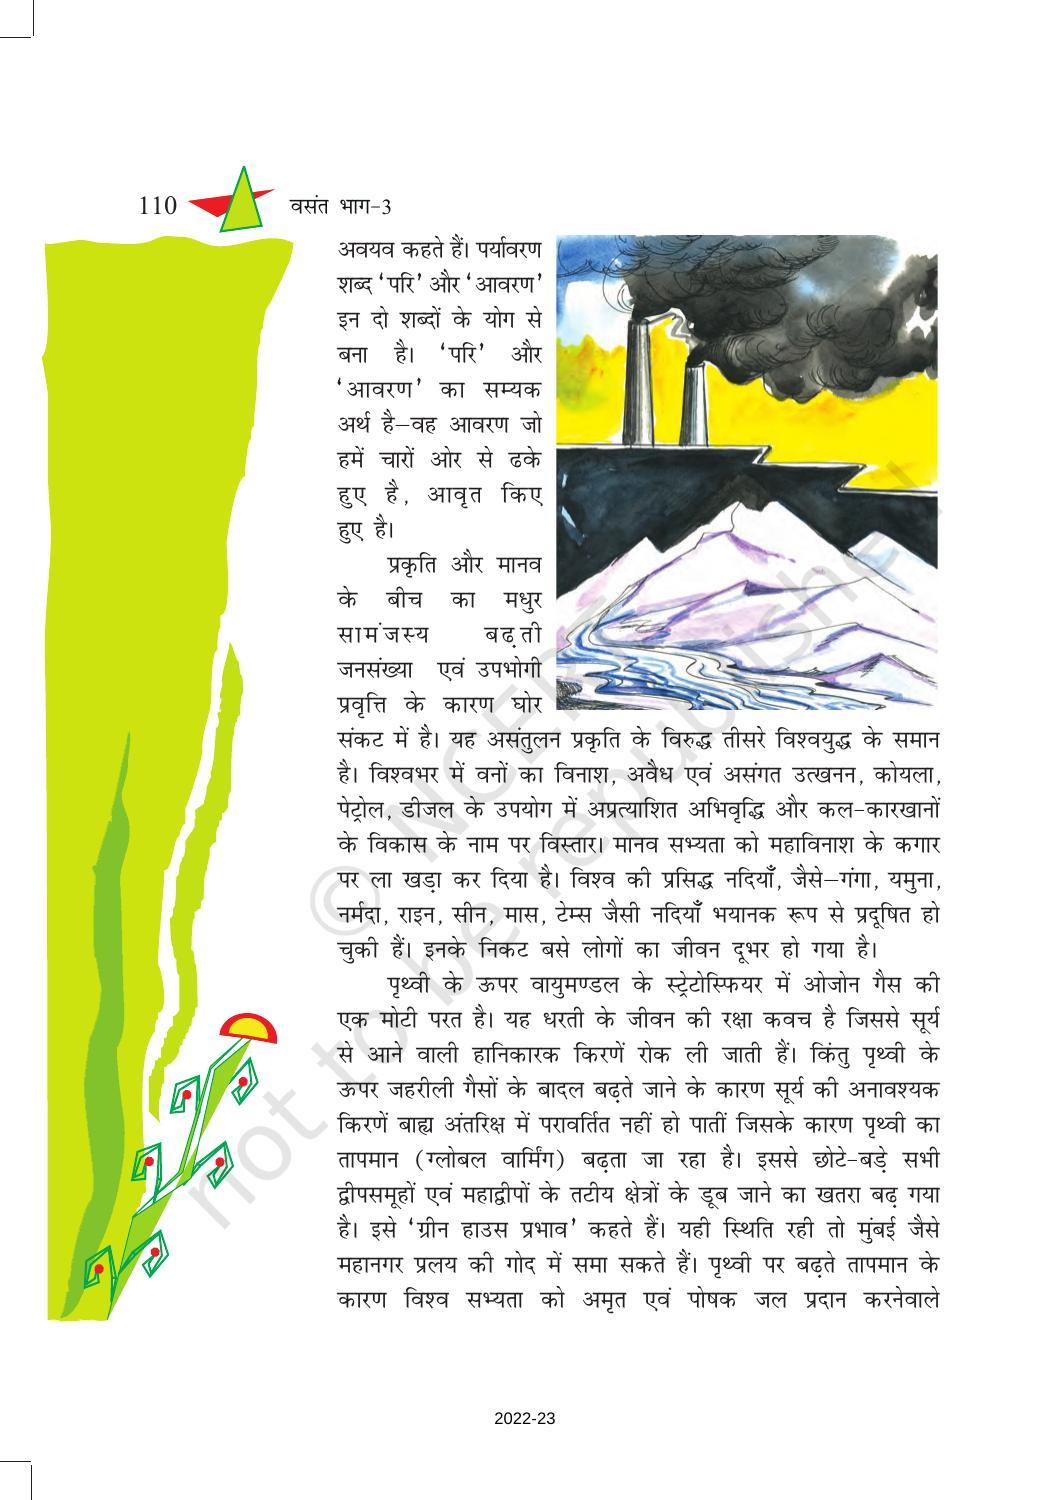 NCERT Book for Class 8 Hindi Vasant Chapter 16 पानी की कहानी - Page 13